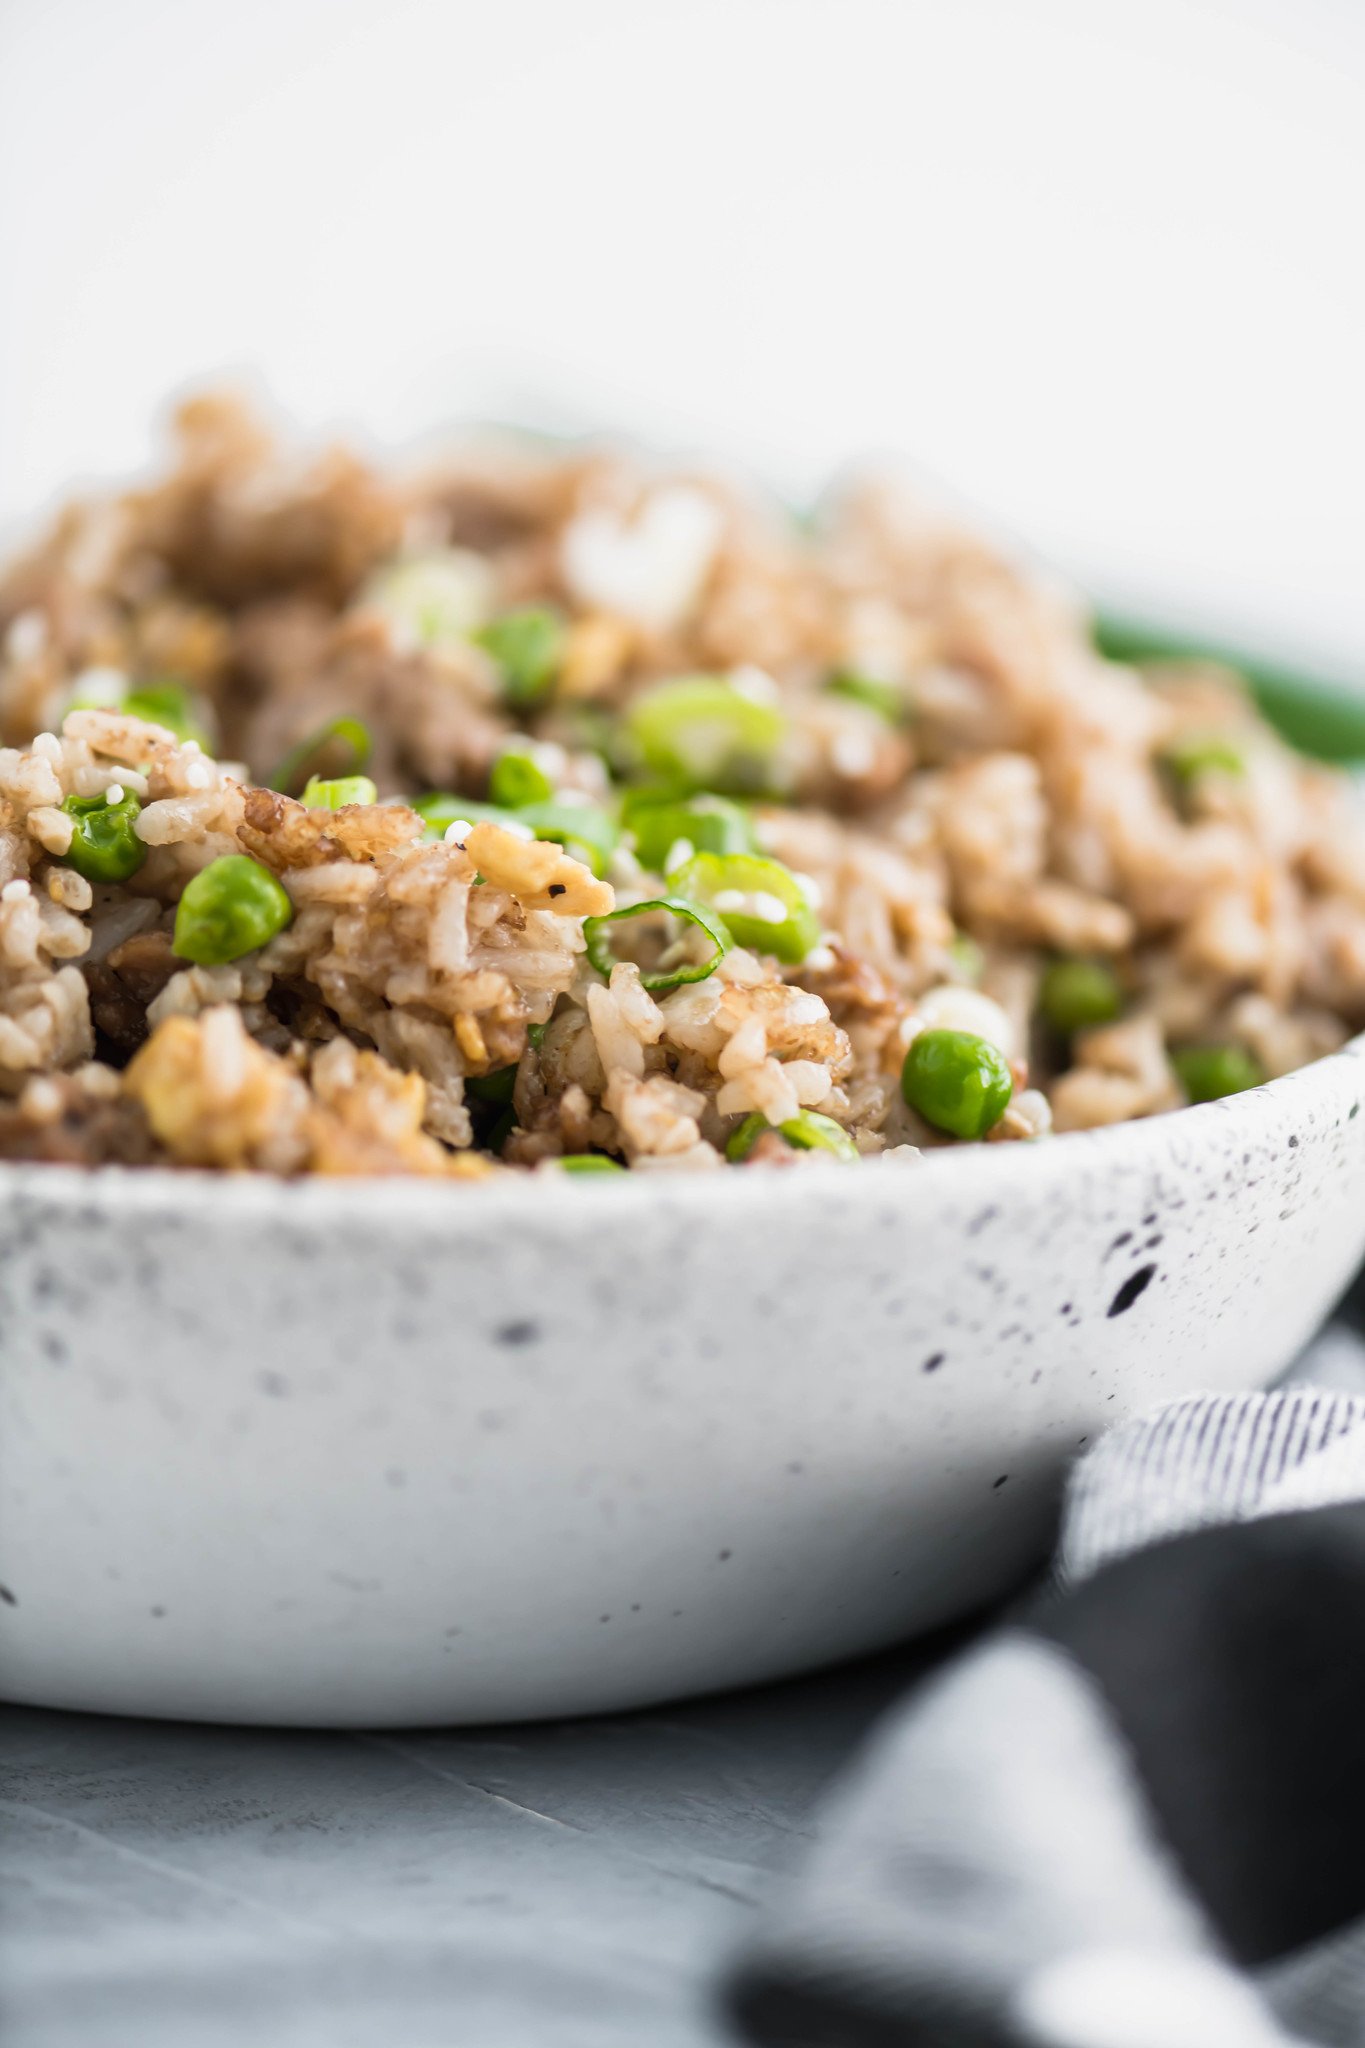 This Chinese takeout inspired Ground Pork Fried Rice is super fast to throw together for lunch or dinner. A great use of leftover rice.